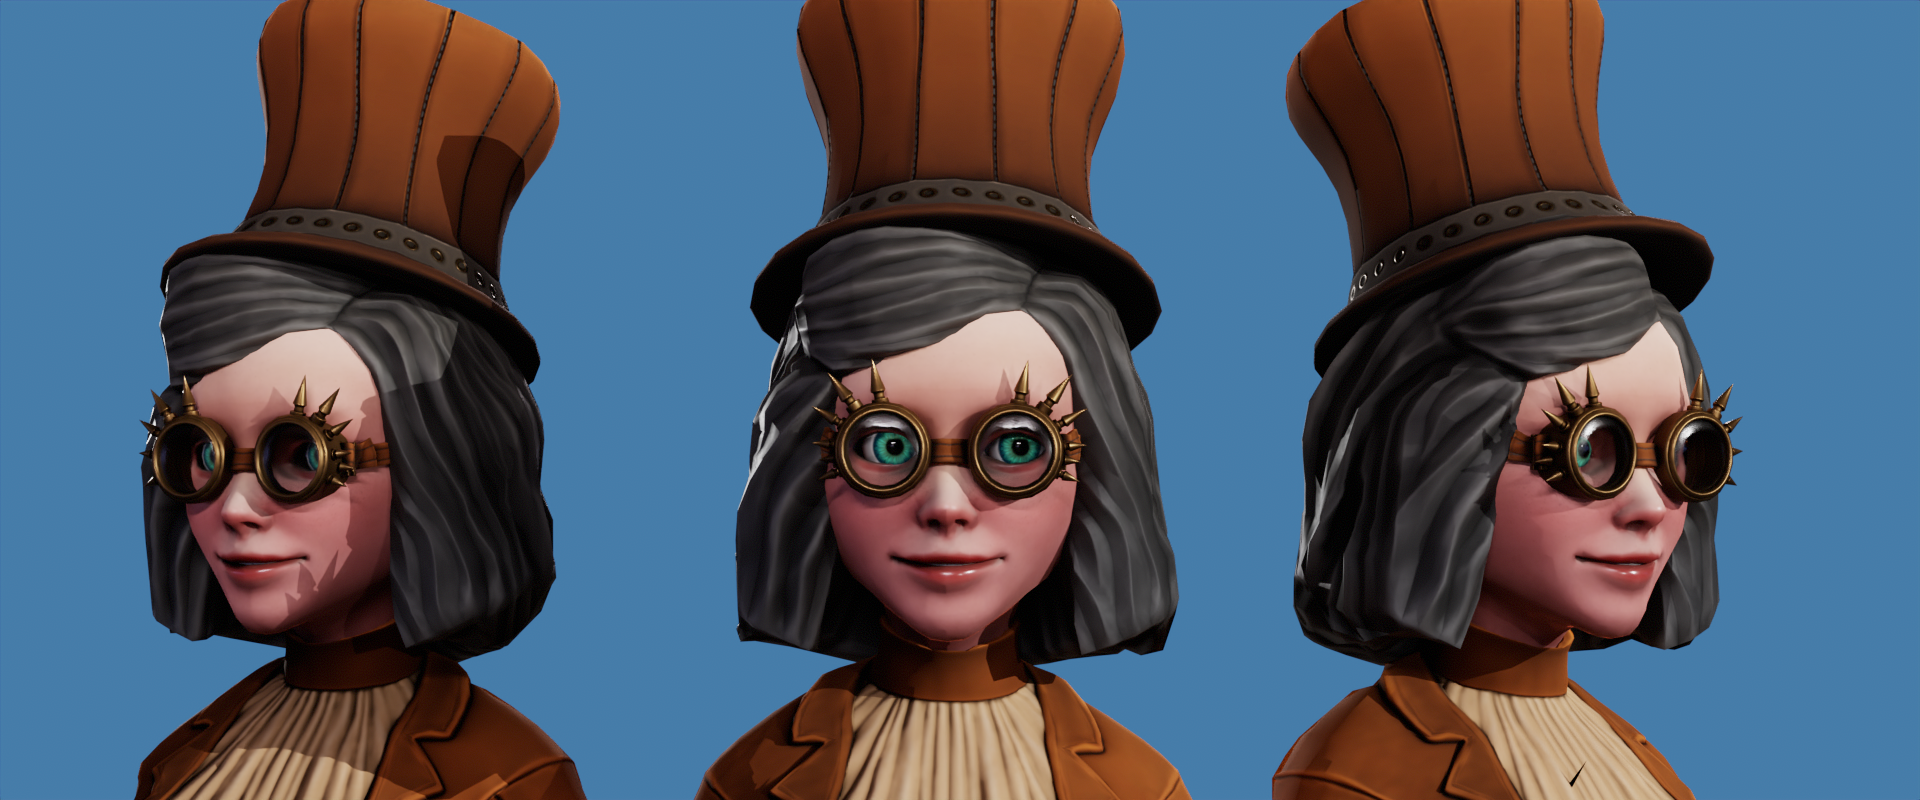 3D Steampunk Girl / Stylized Female 3D Character